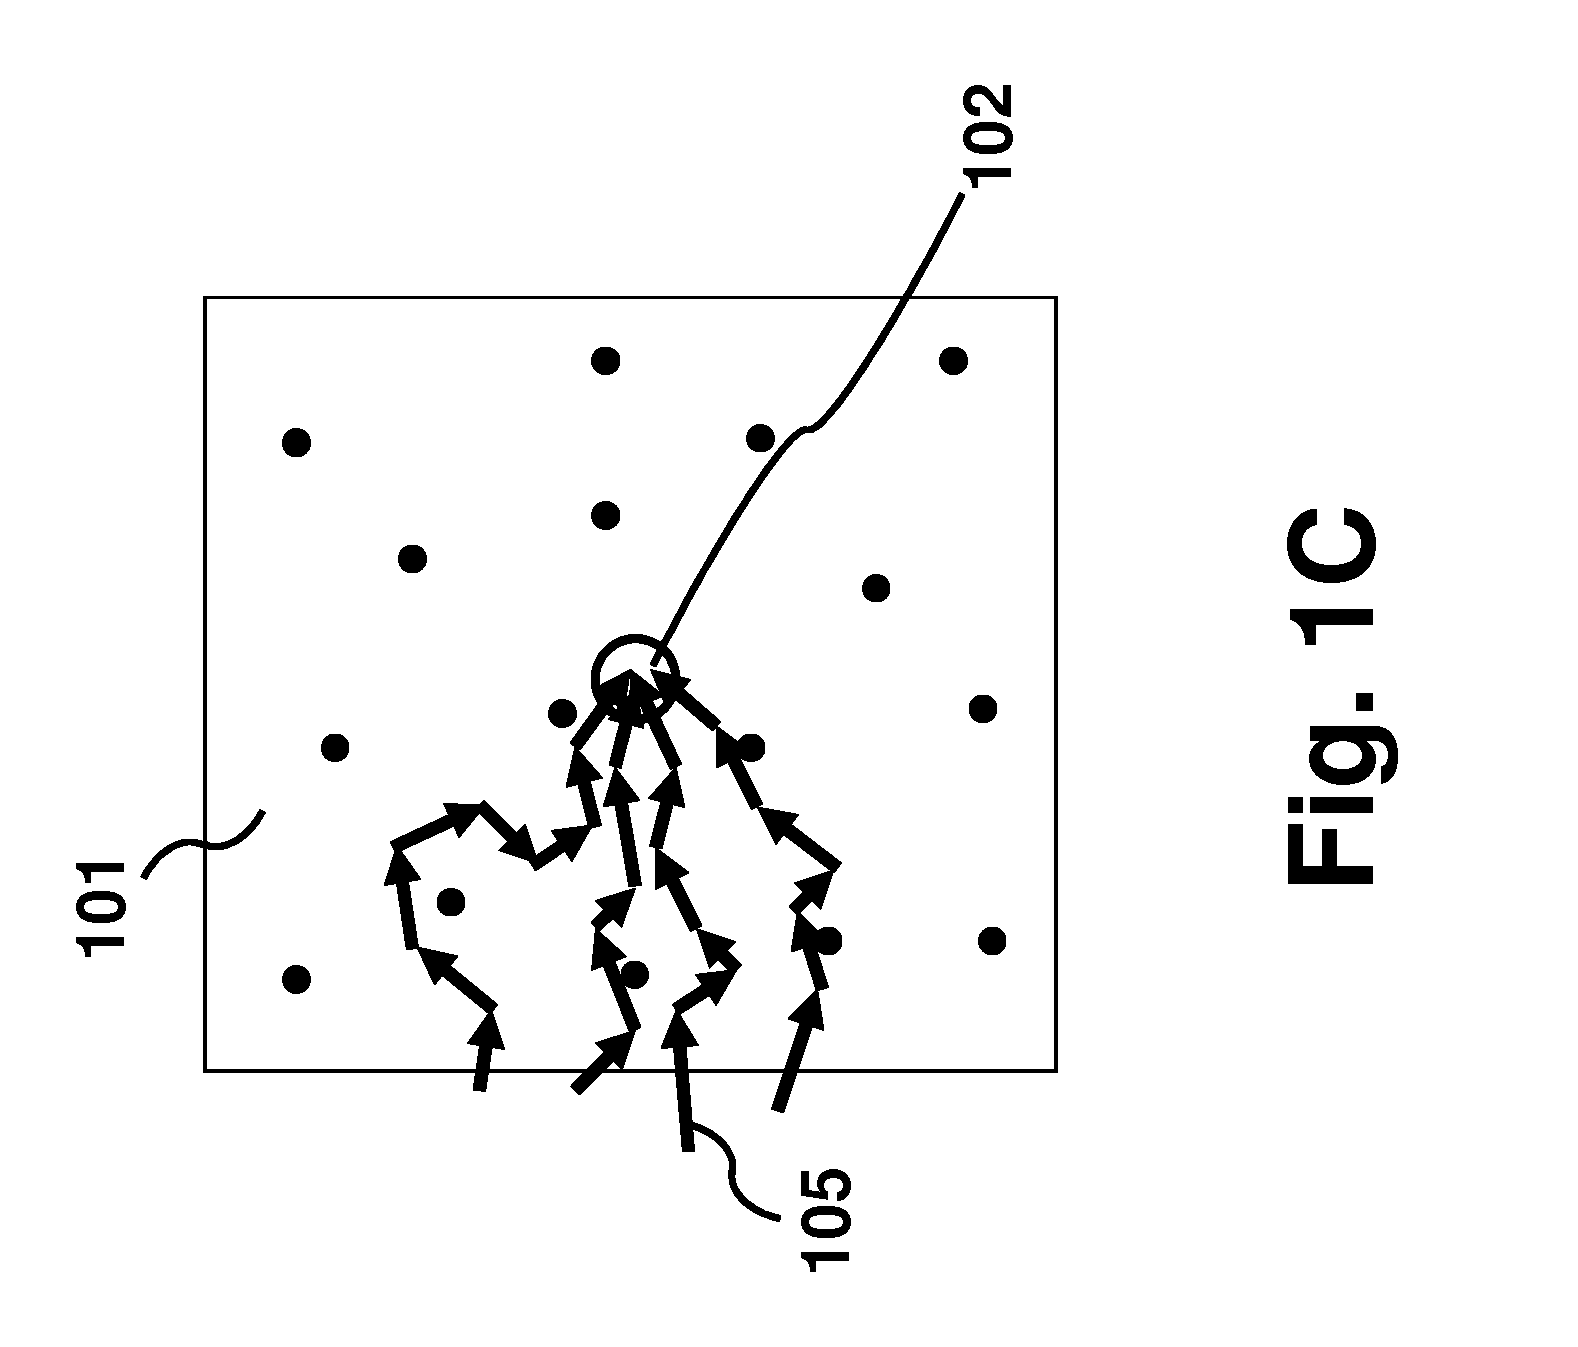 Apparatus and method for irradiating a medium